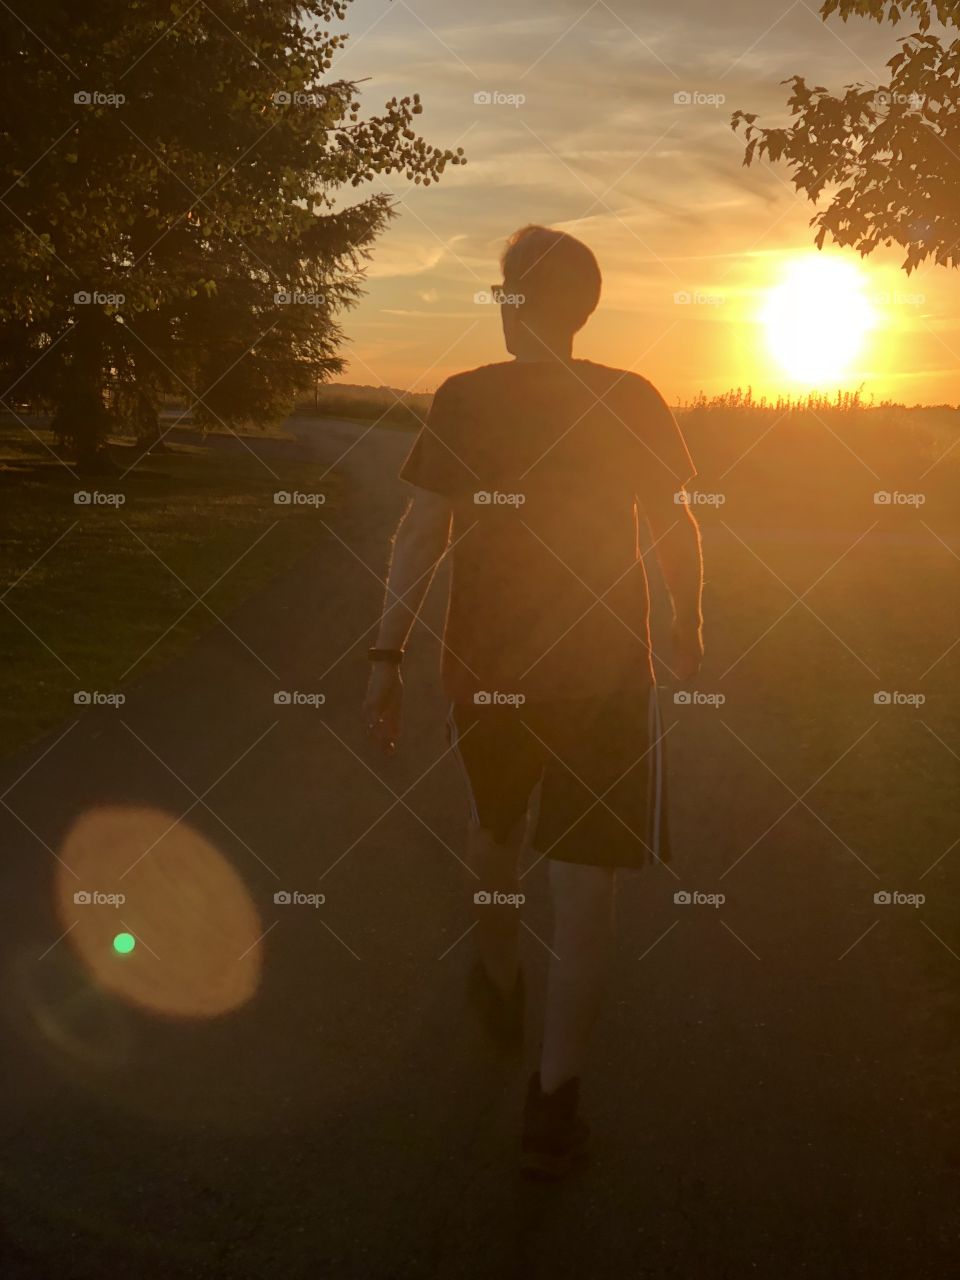 A guy walking in front of the sun set at a very bright point. It’s a darker image with the suns lighting the corner which adds a neat effect.